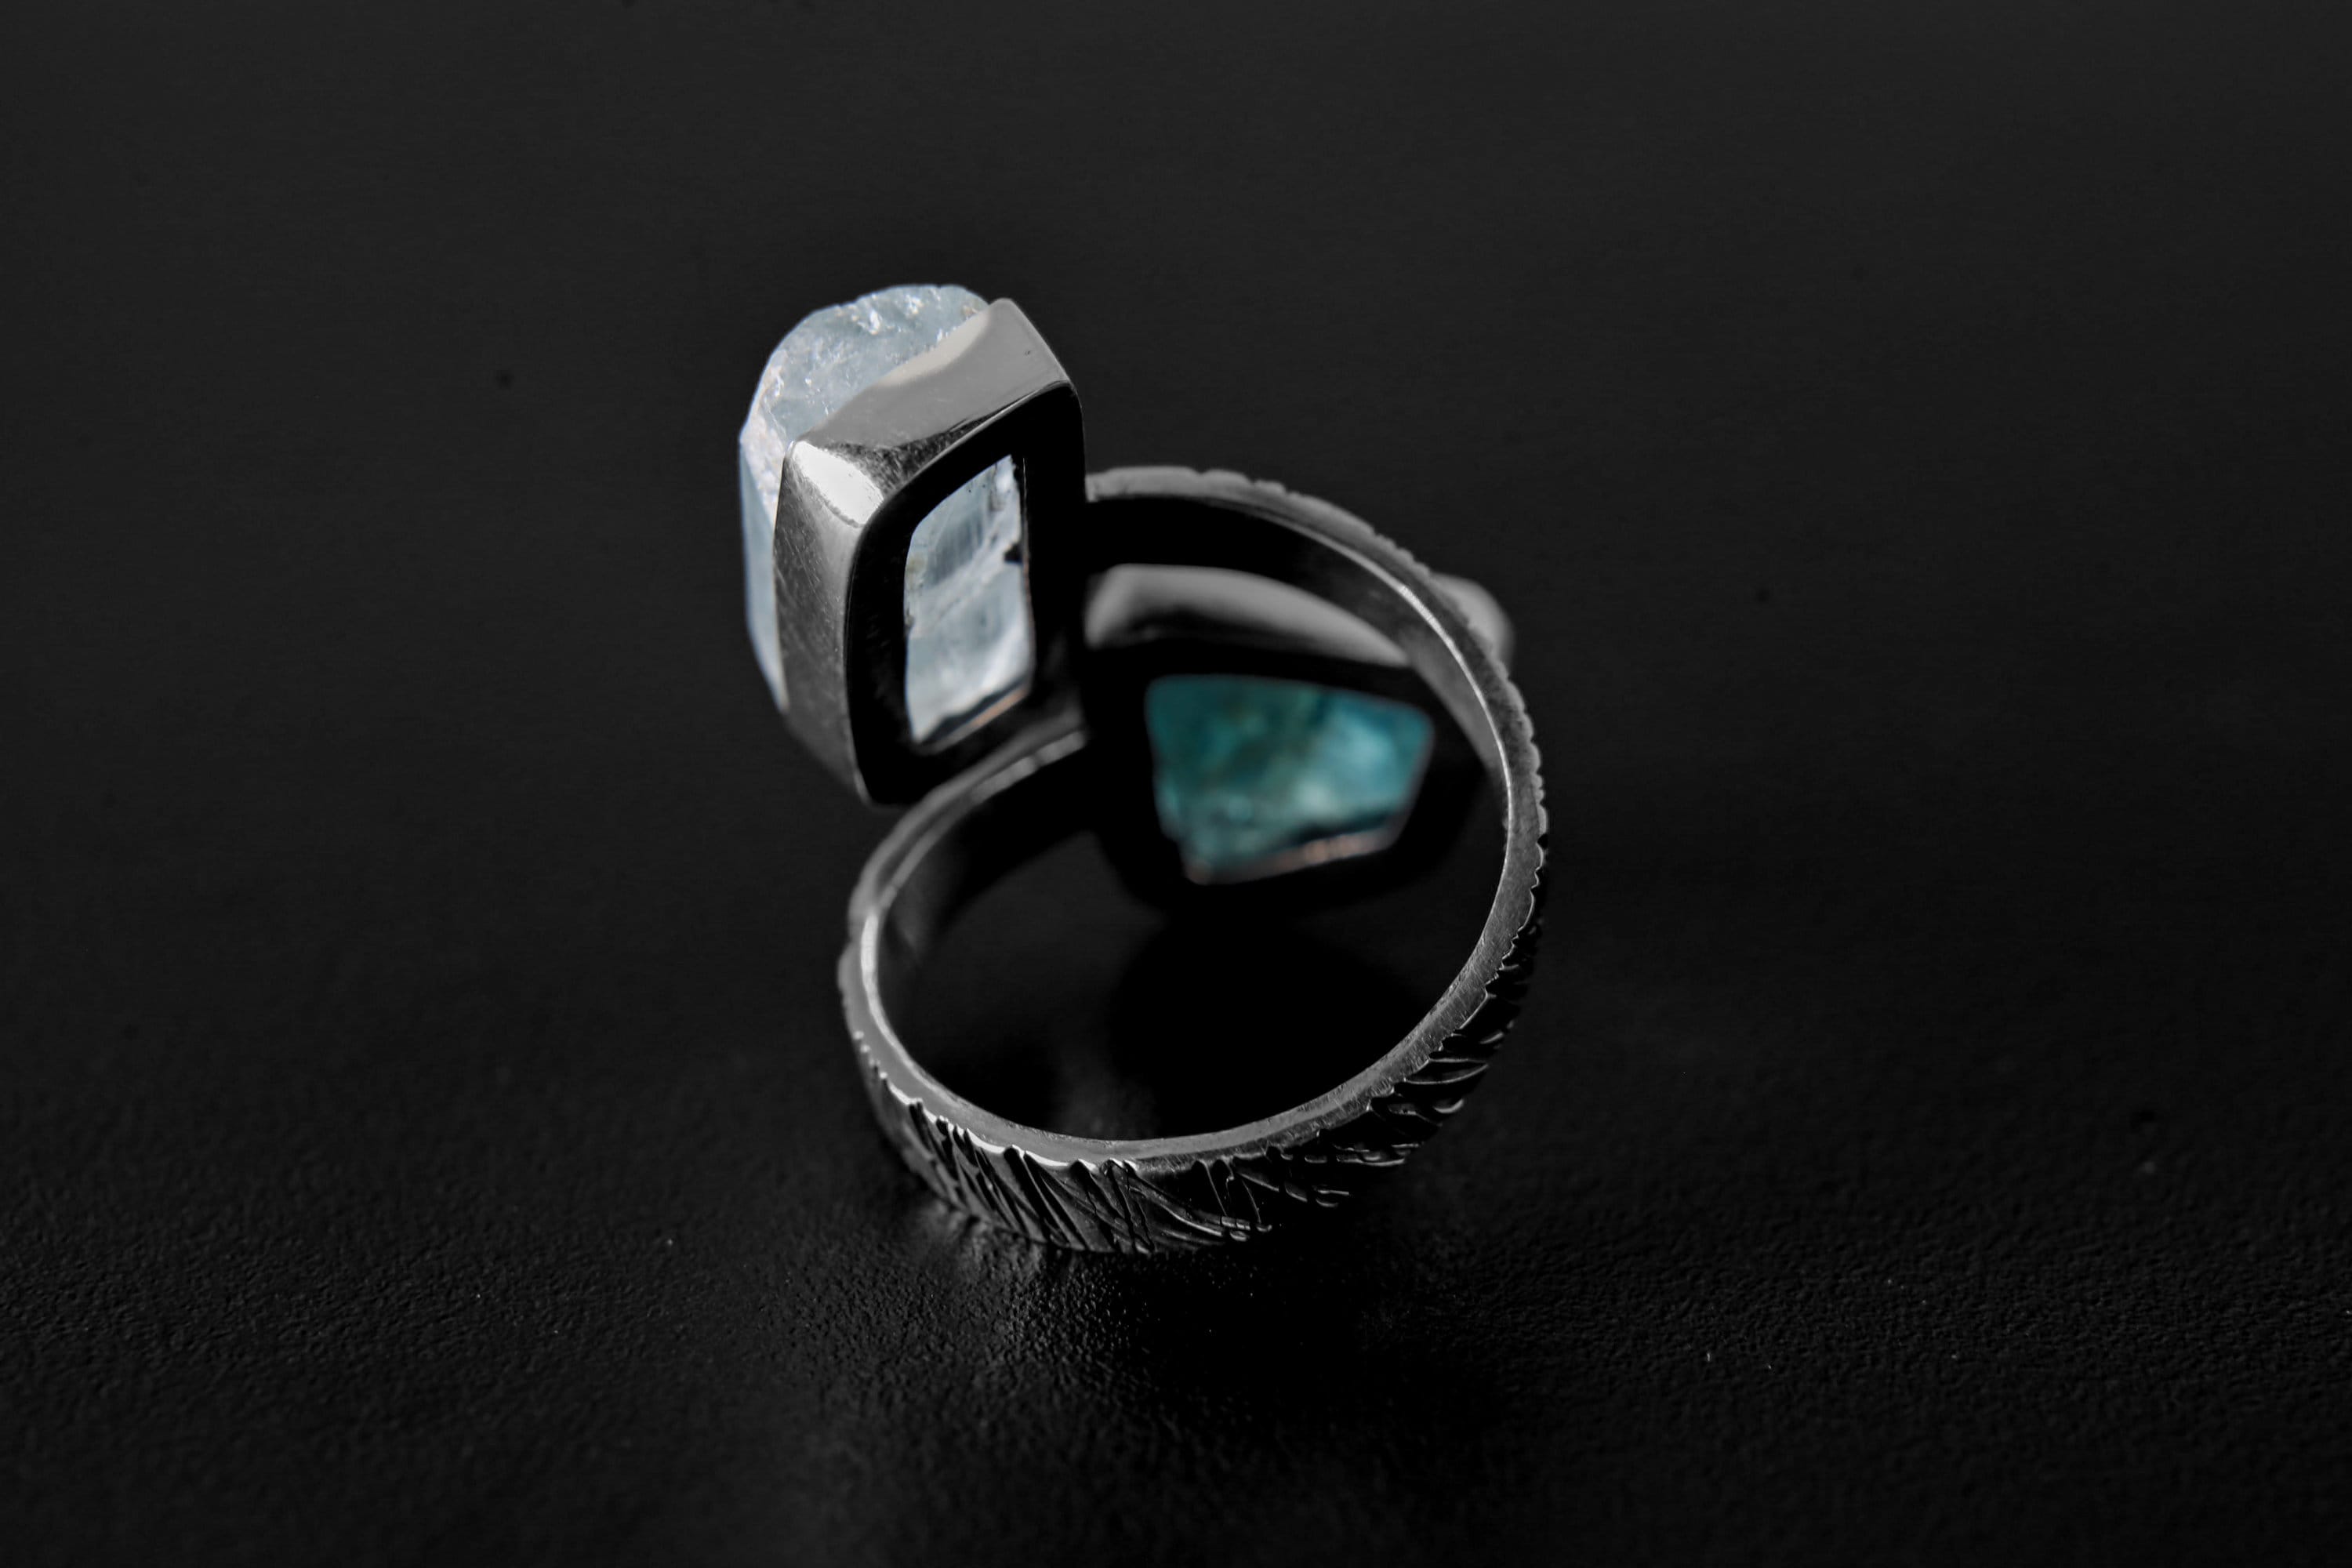 Gem Aquamarine, Blue Crystal Apatite - 925 Sterling Silver - Double Stone - Textured, High Shine Polish - Adjustable Open Ring Band